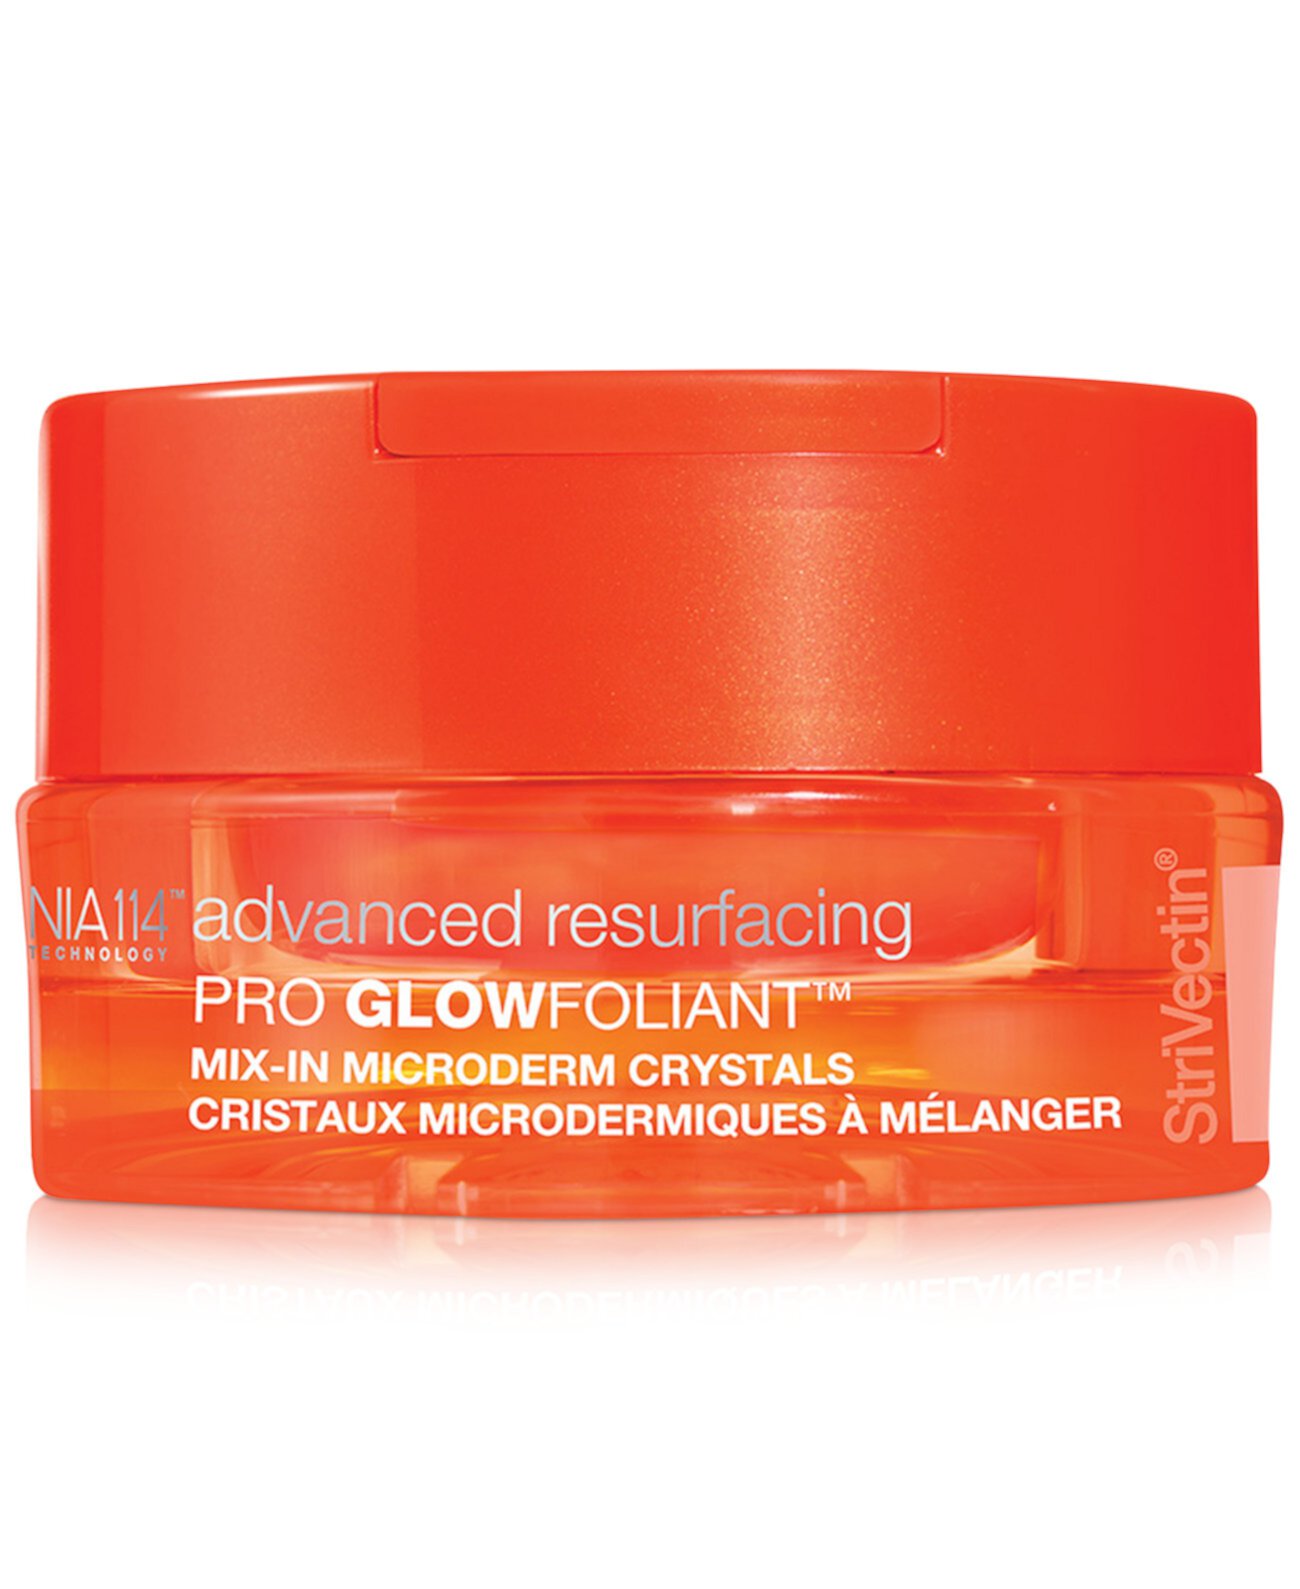 Pro Glowfoliant Mix-In Microderm Crystals StriVectin